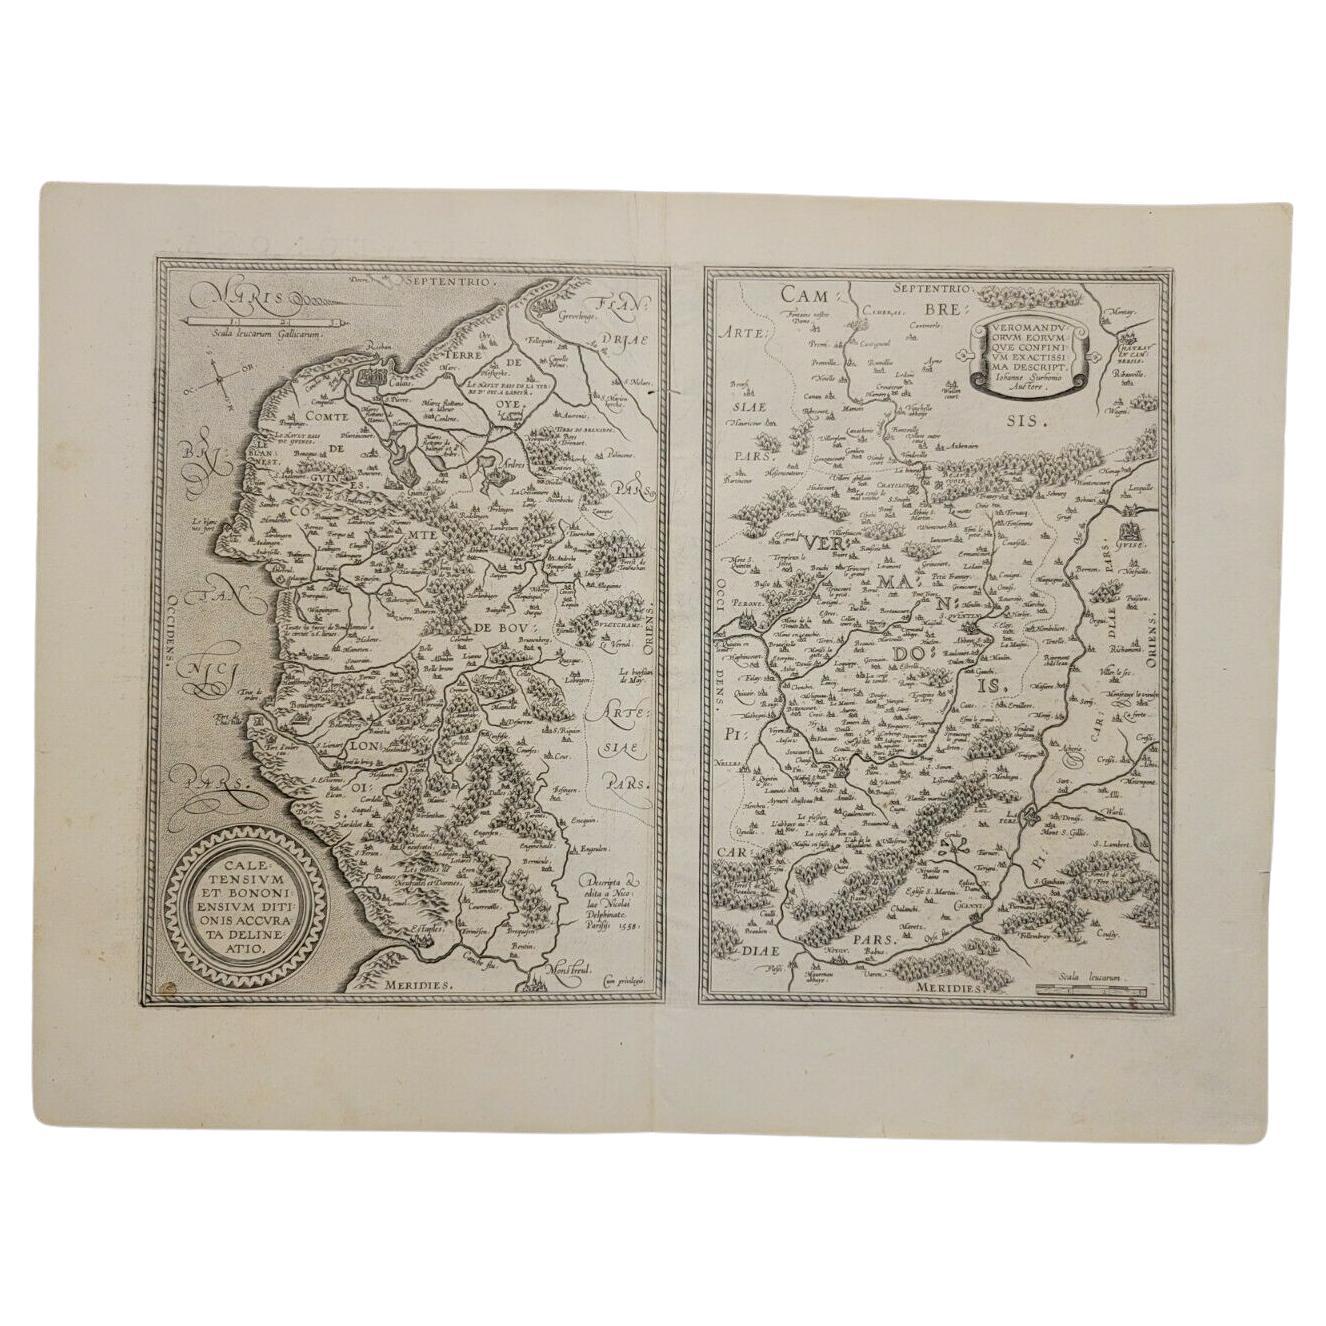 1590 Ortelius Map of Calais and Vermandois, France and Vicinity Ric.a014